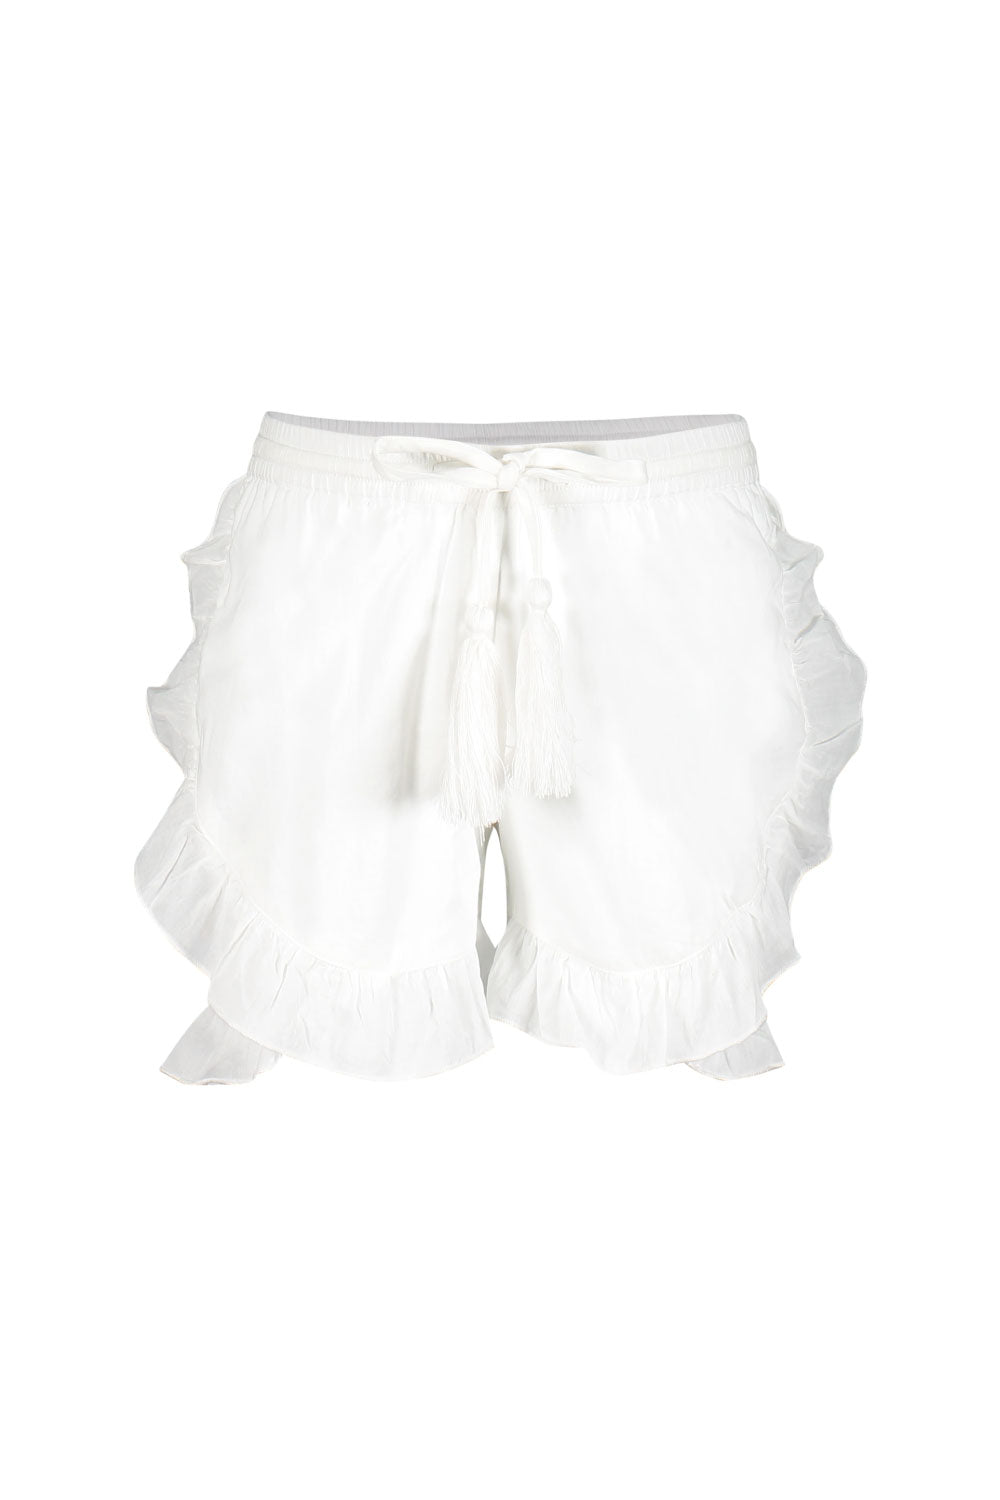 Image of the front of the Larissa Shorts in White.